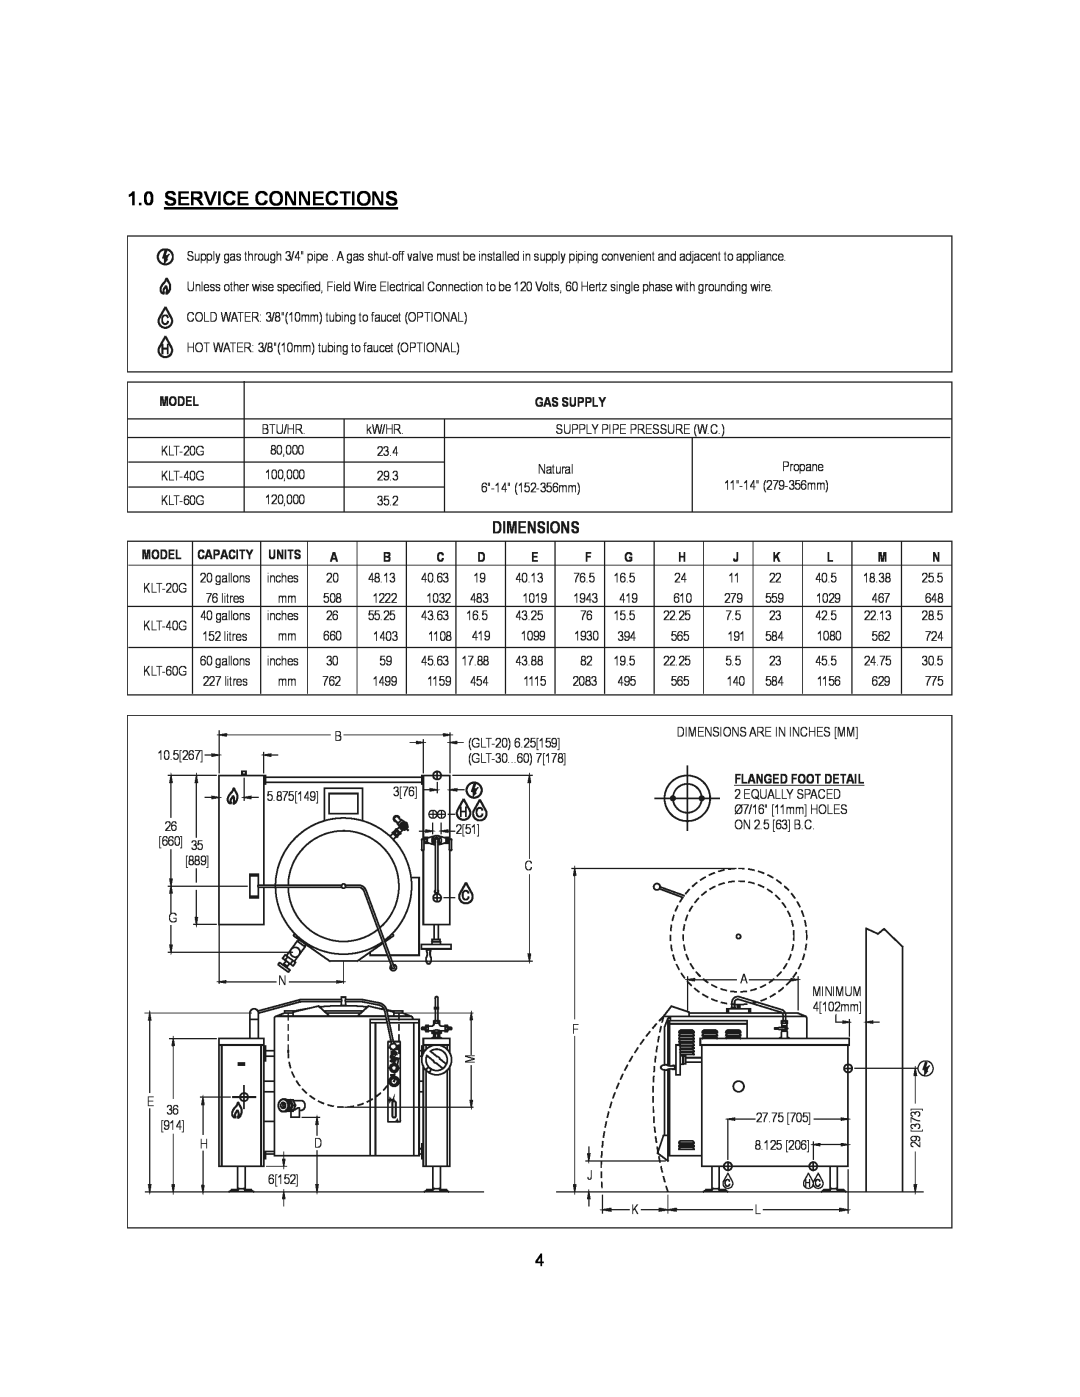 Blodgett KLT-G Series manual Service Connections, Dimensions, Model 